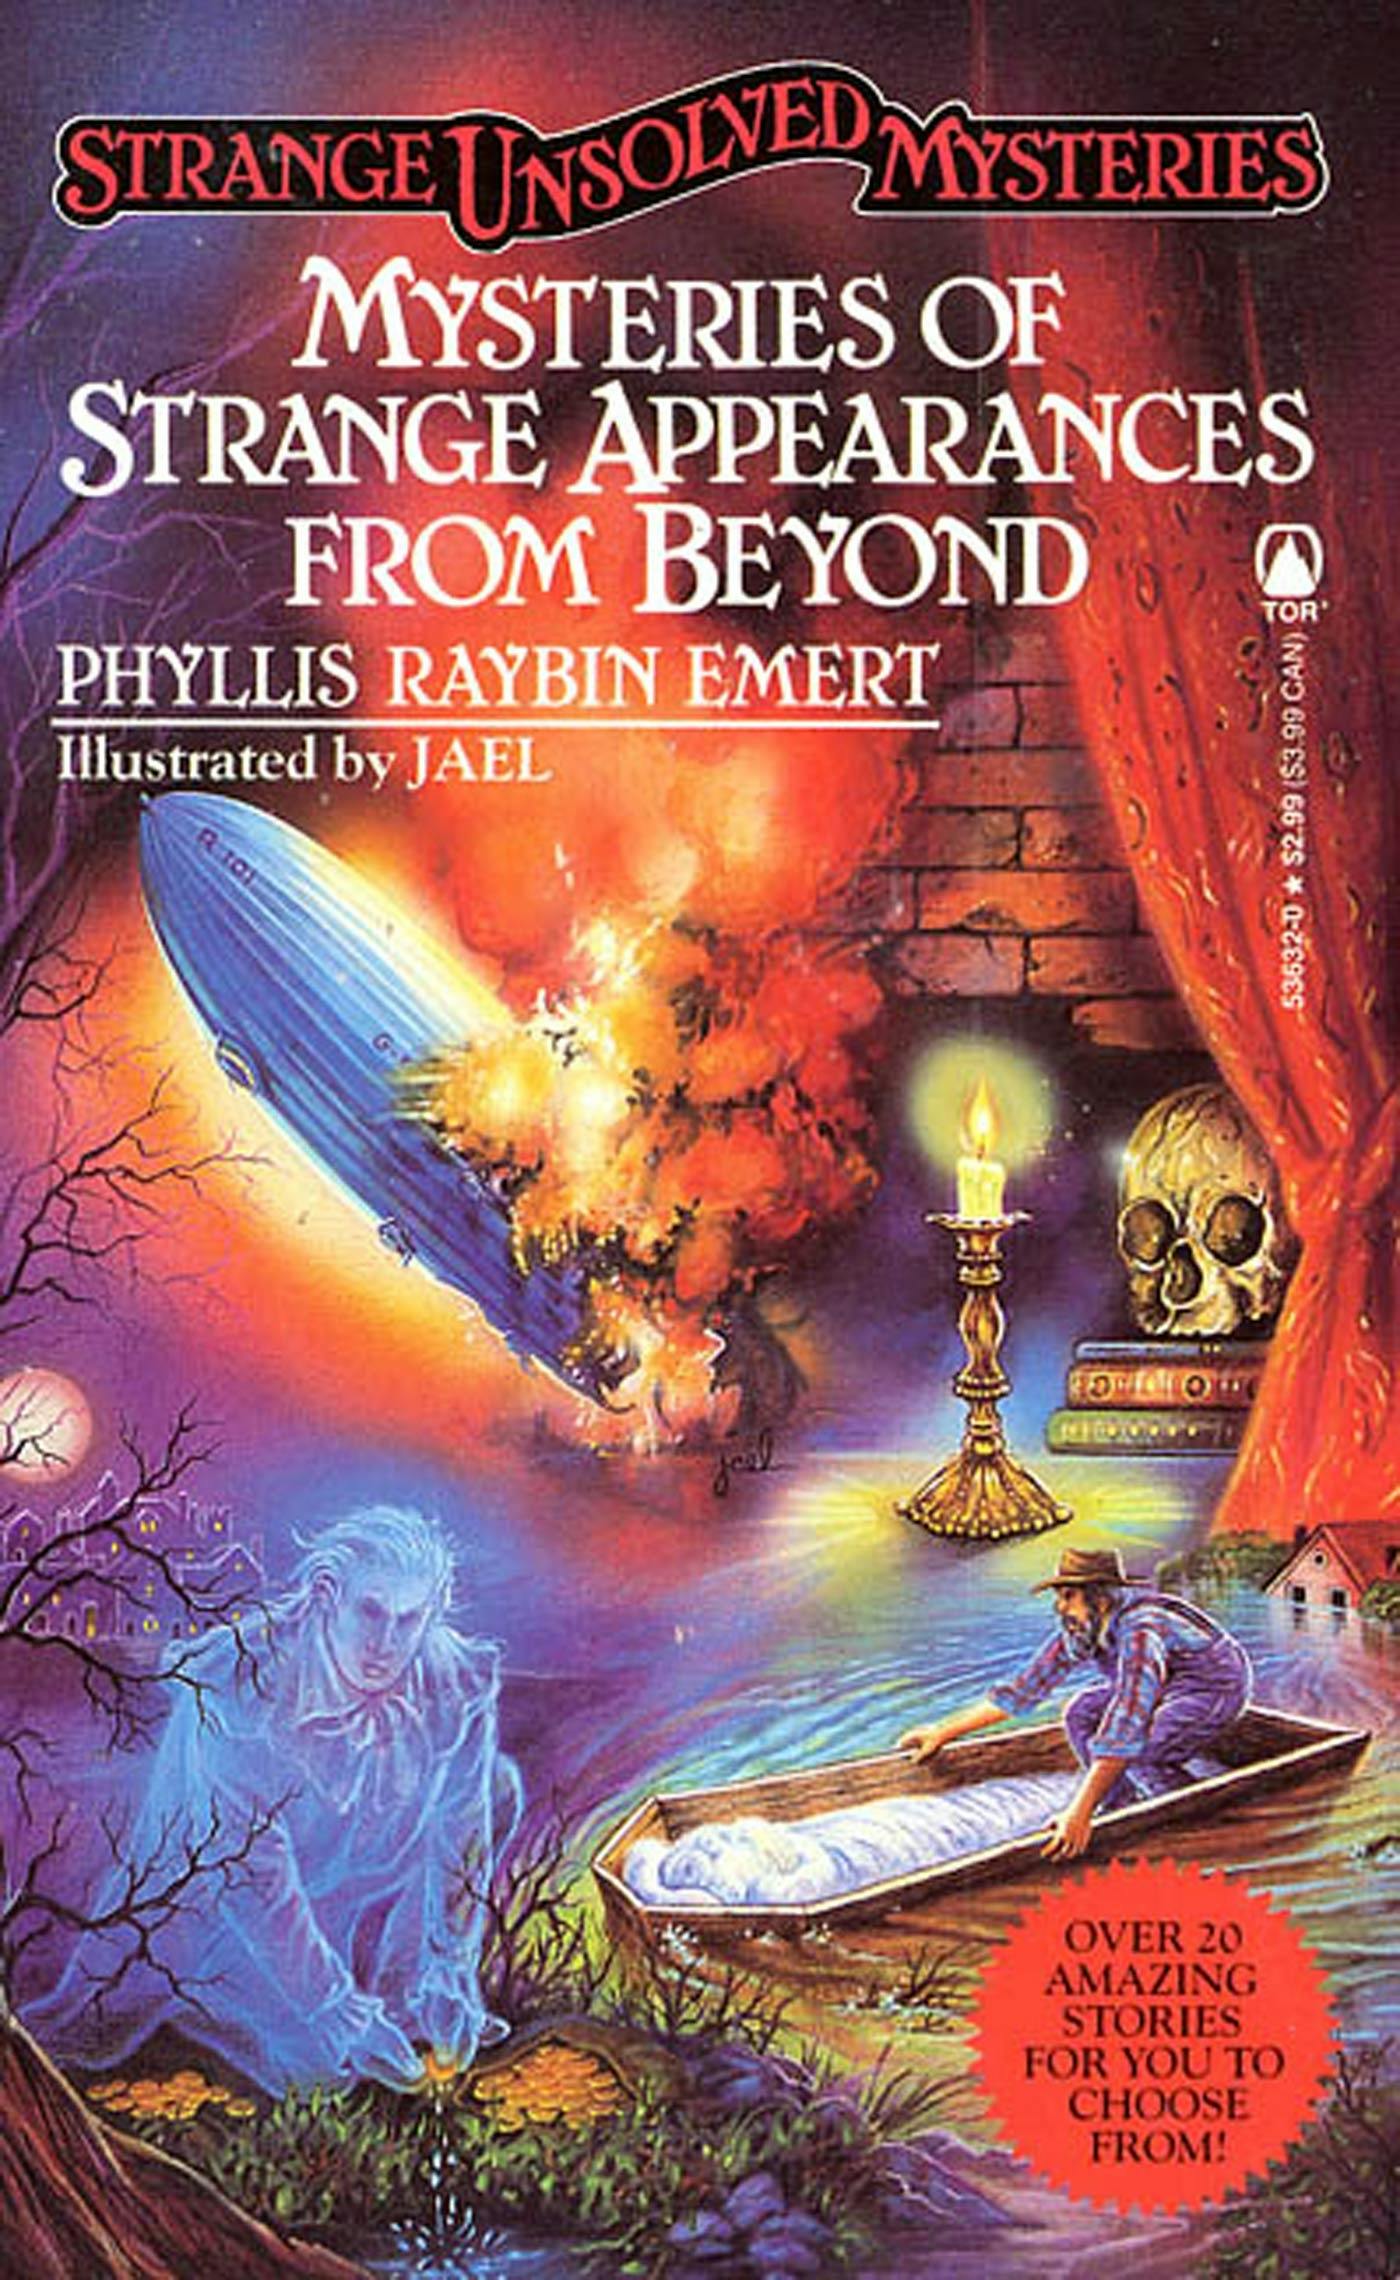 Cover for the book titled as: Mysteries of Strange Appearances From Beyond